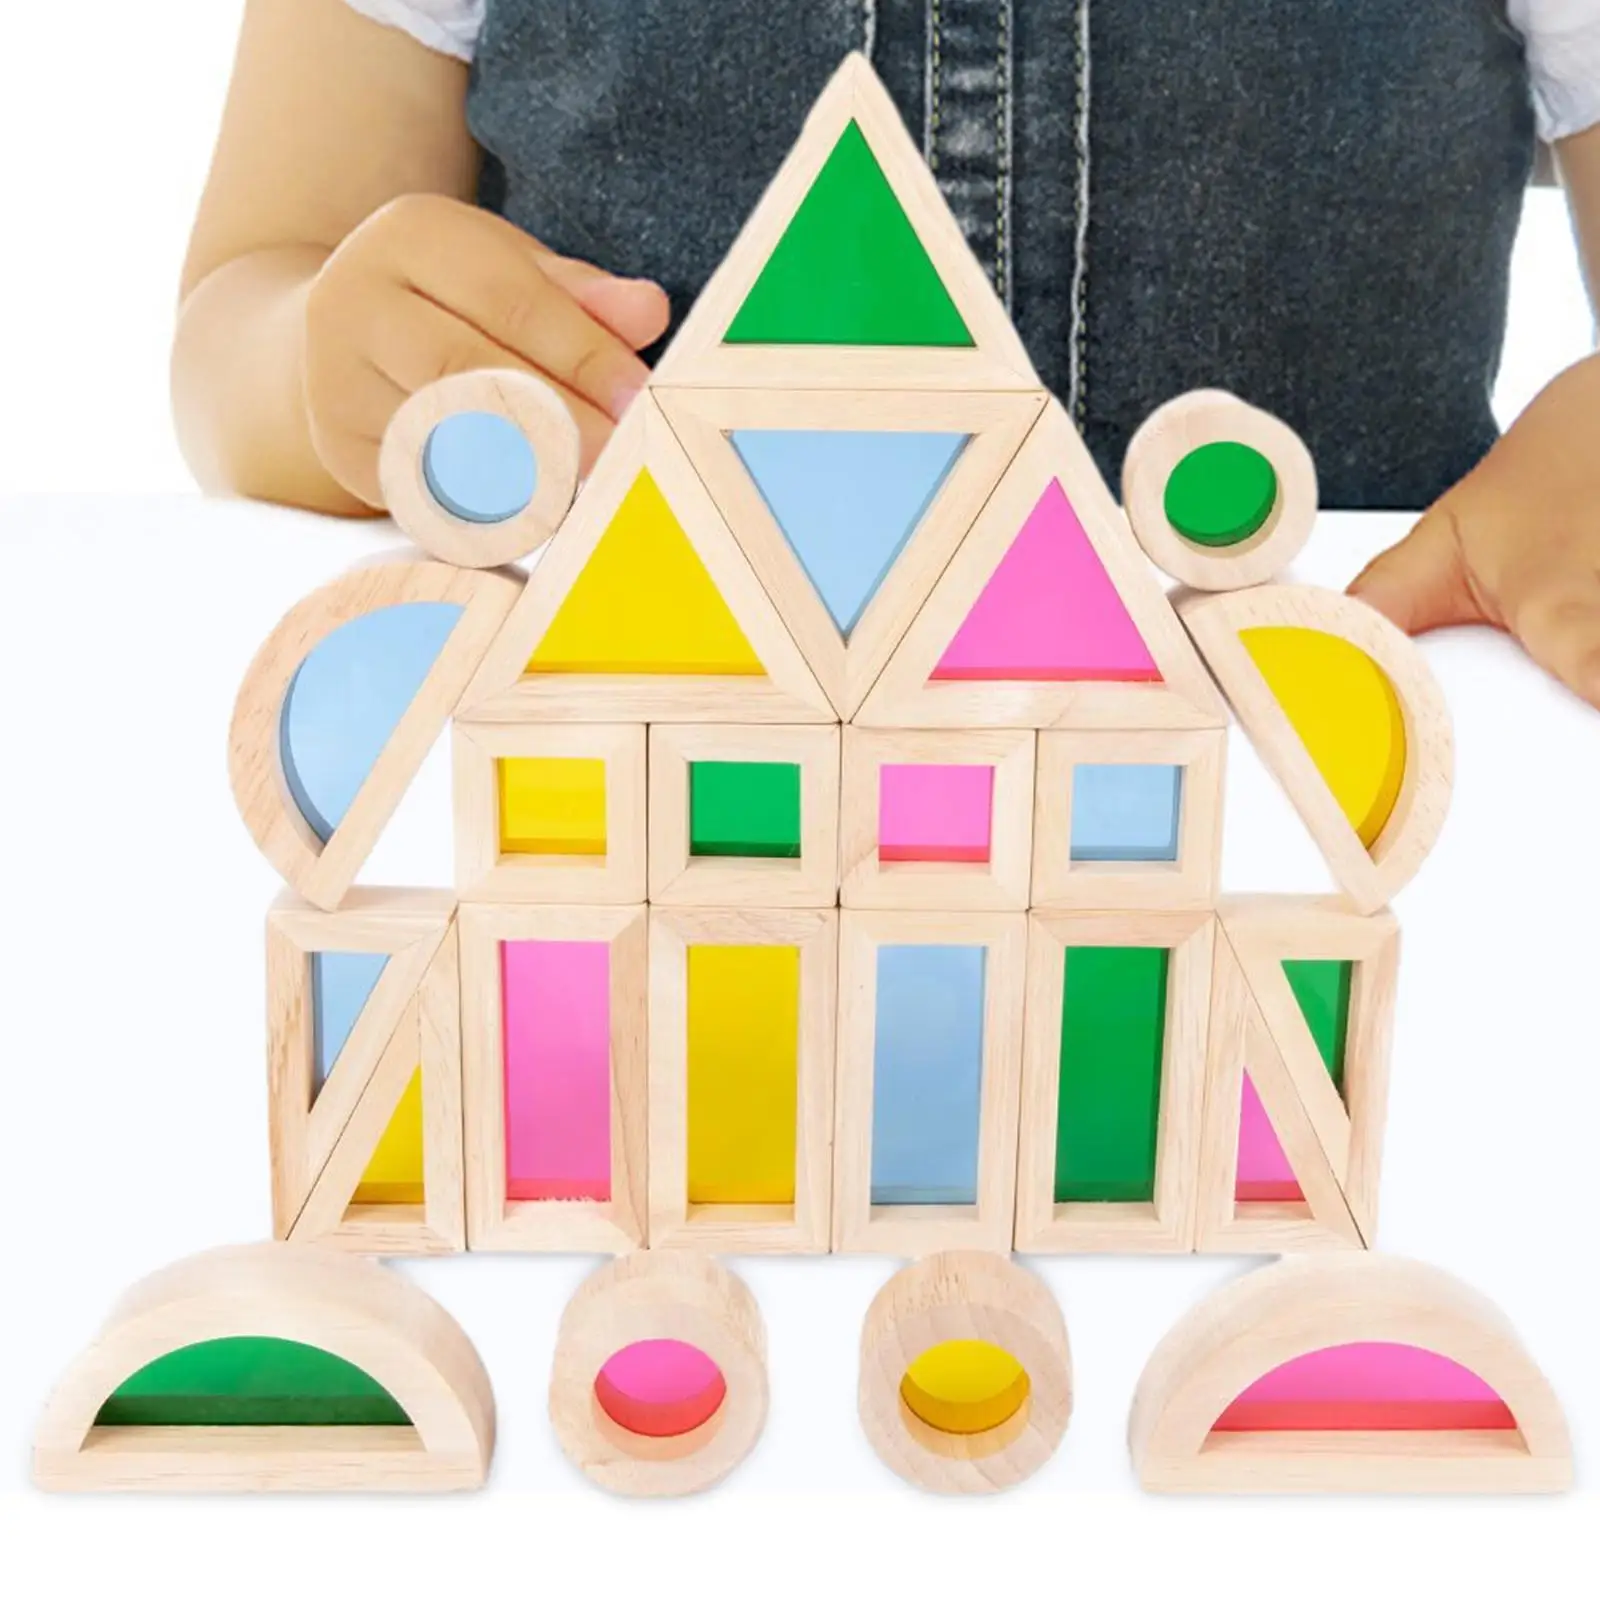 24 Pieces Stacking Blocks Kids Ages 2-4 Construction Toys Boys Girls Educational Toys Parent Child Game Wood Rainbow Blocks